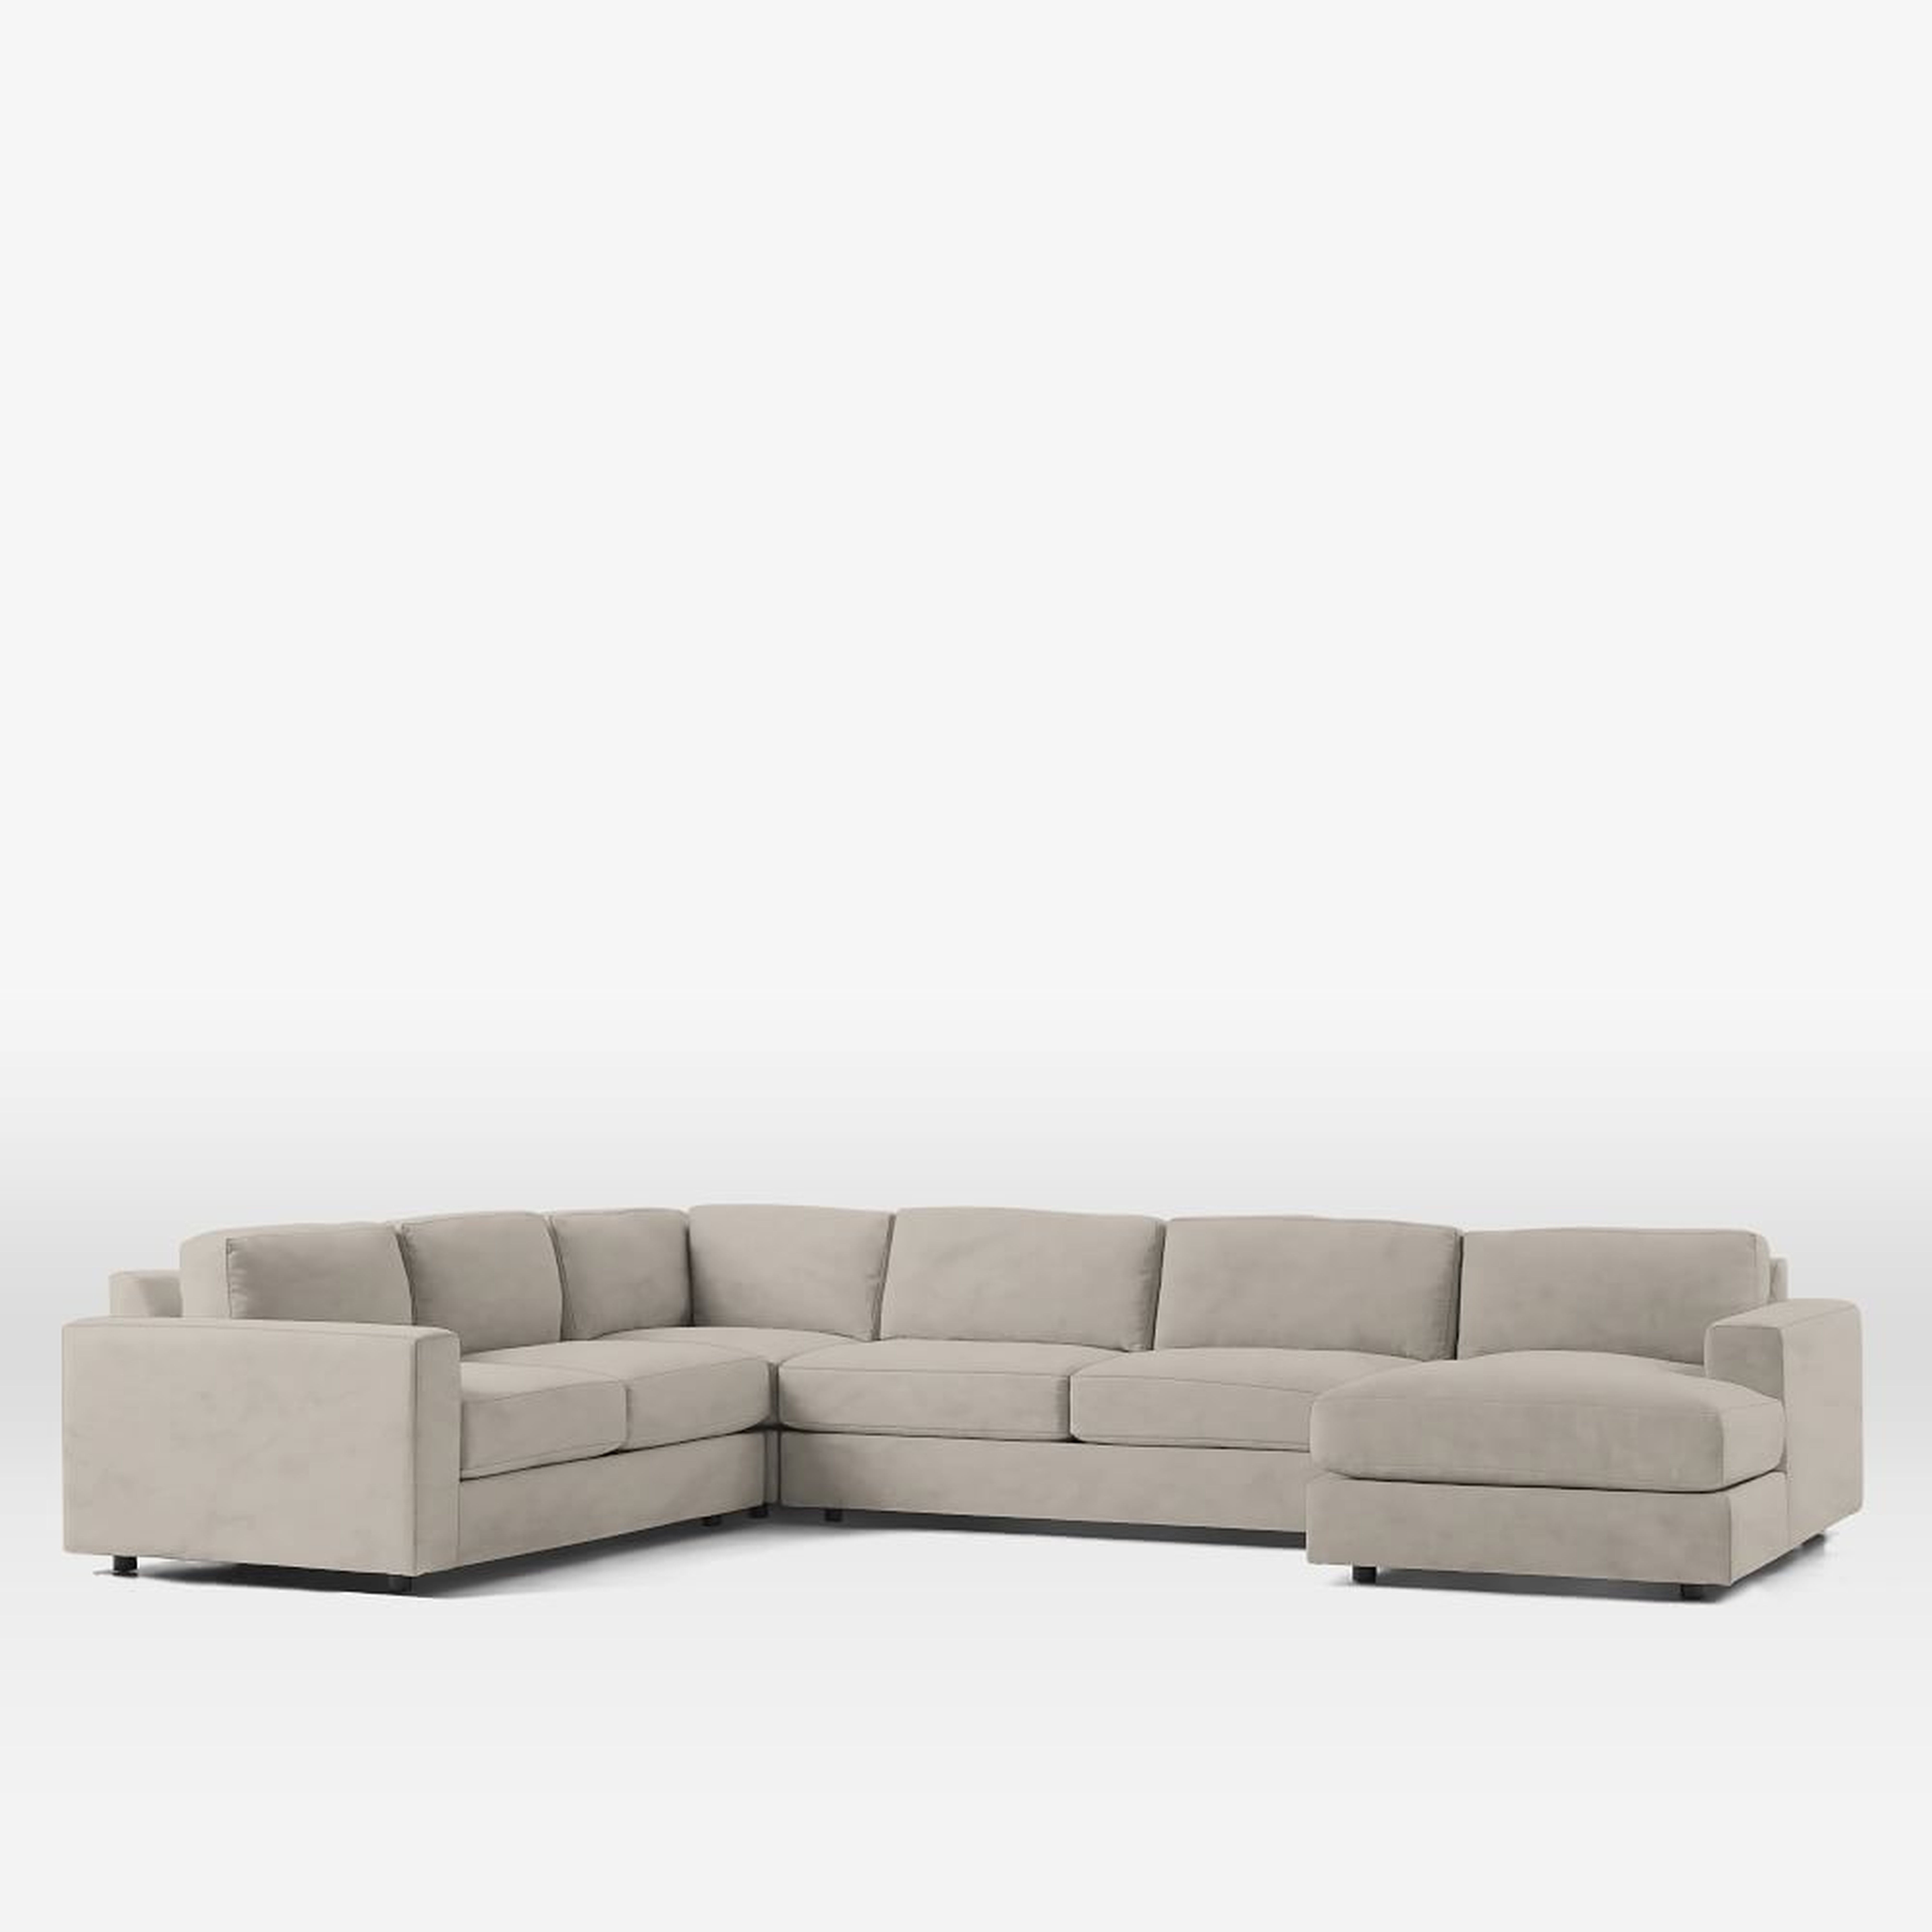 Urban 106" Right 4-Piece Chaise Sectional, Performance Velvet, Silver, Down Blend Fill - West Elm